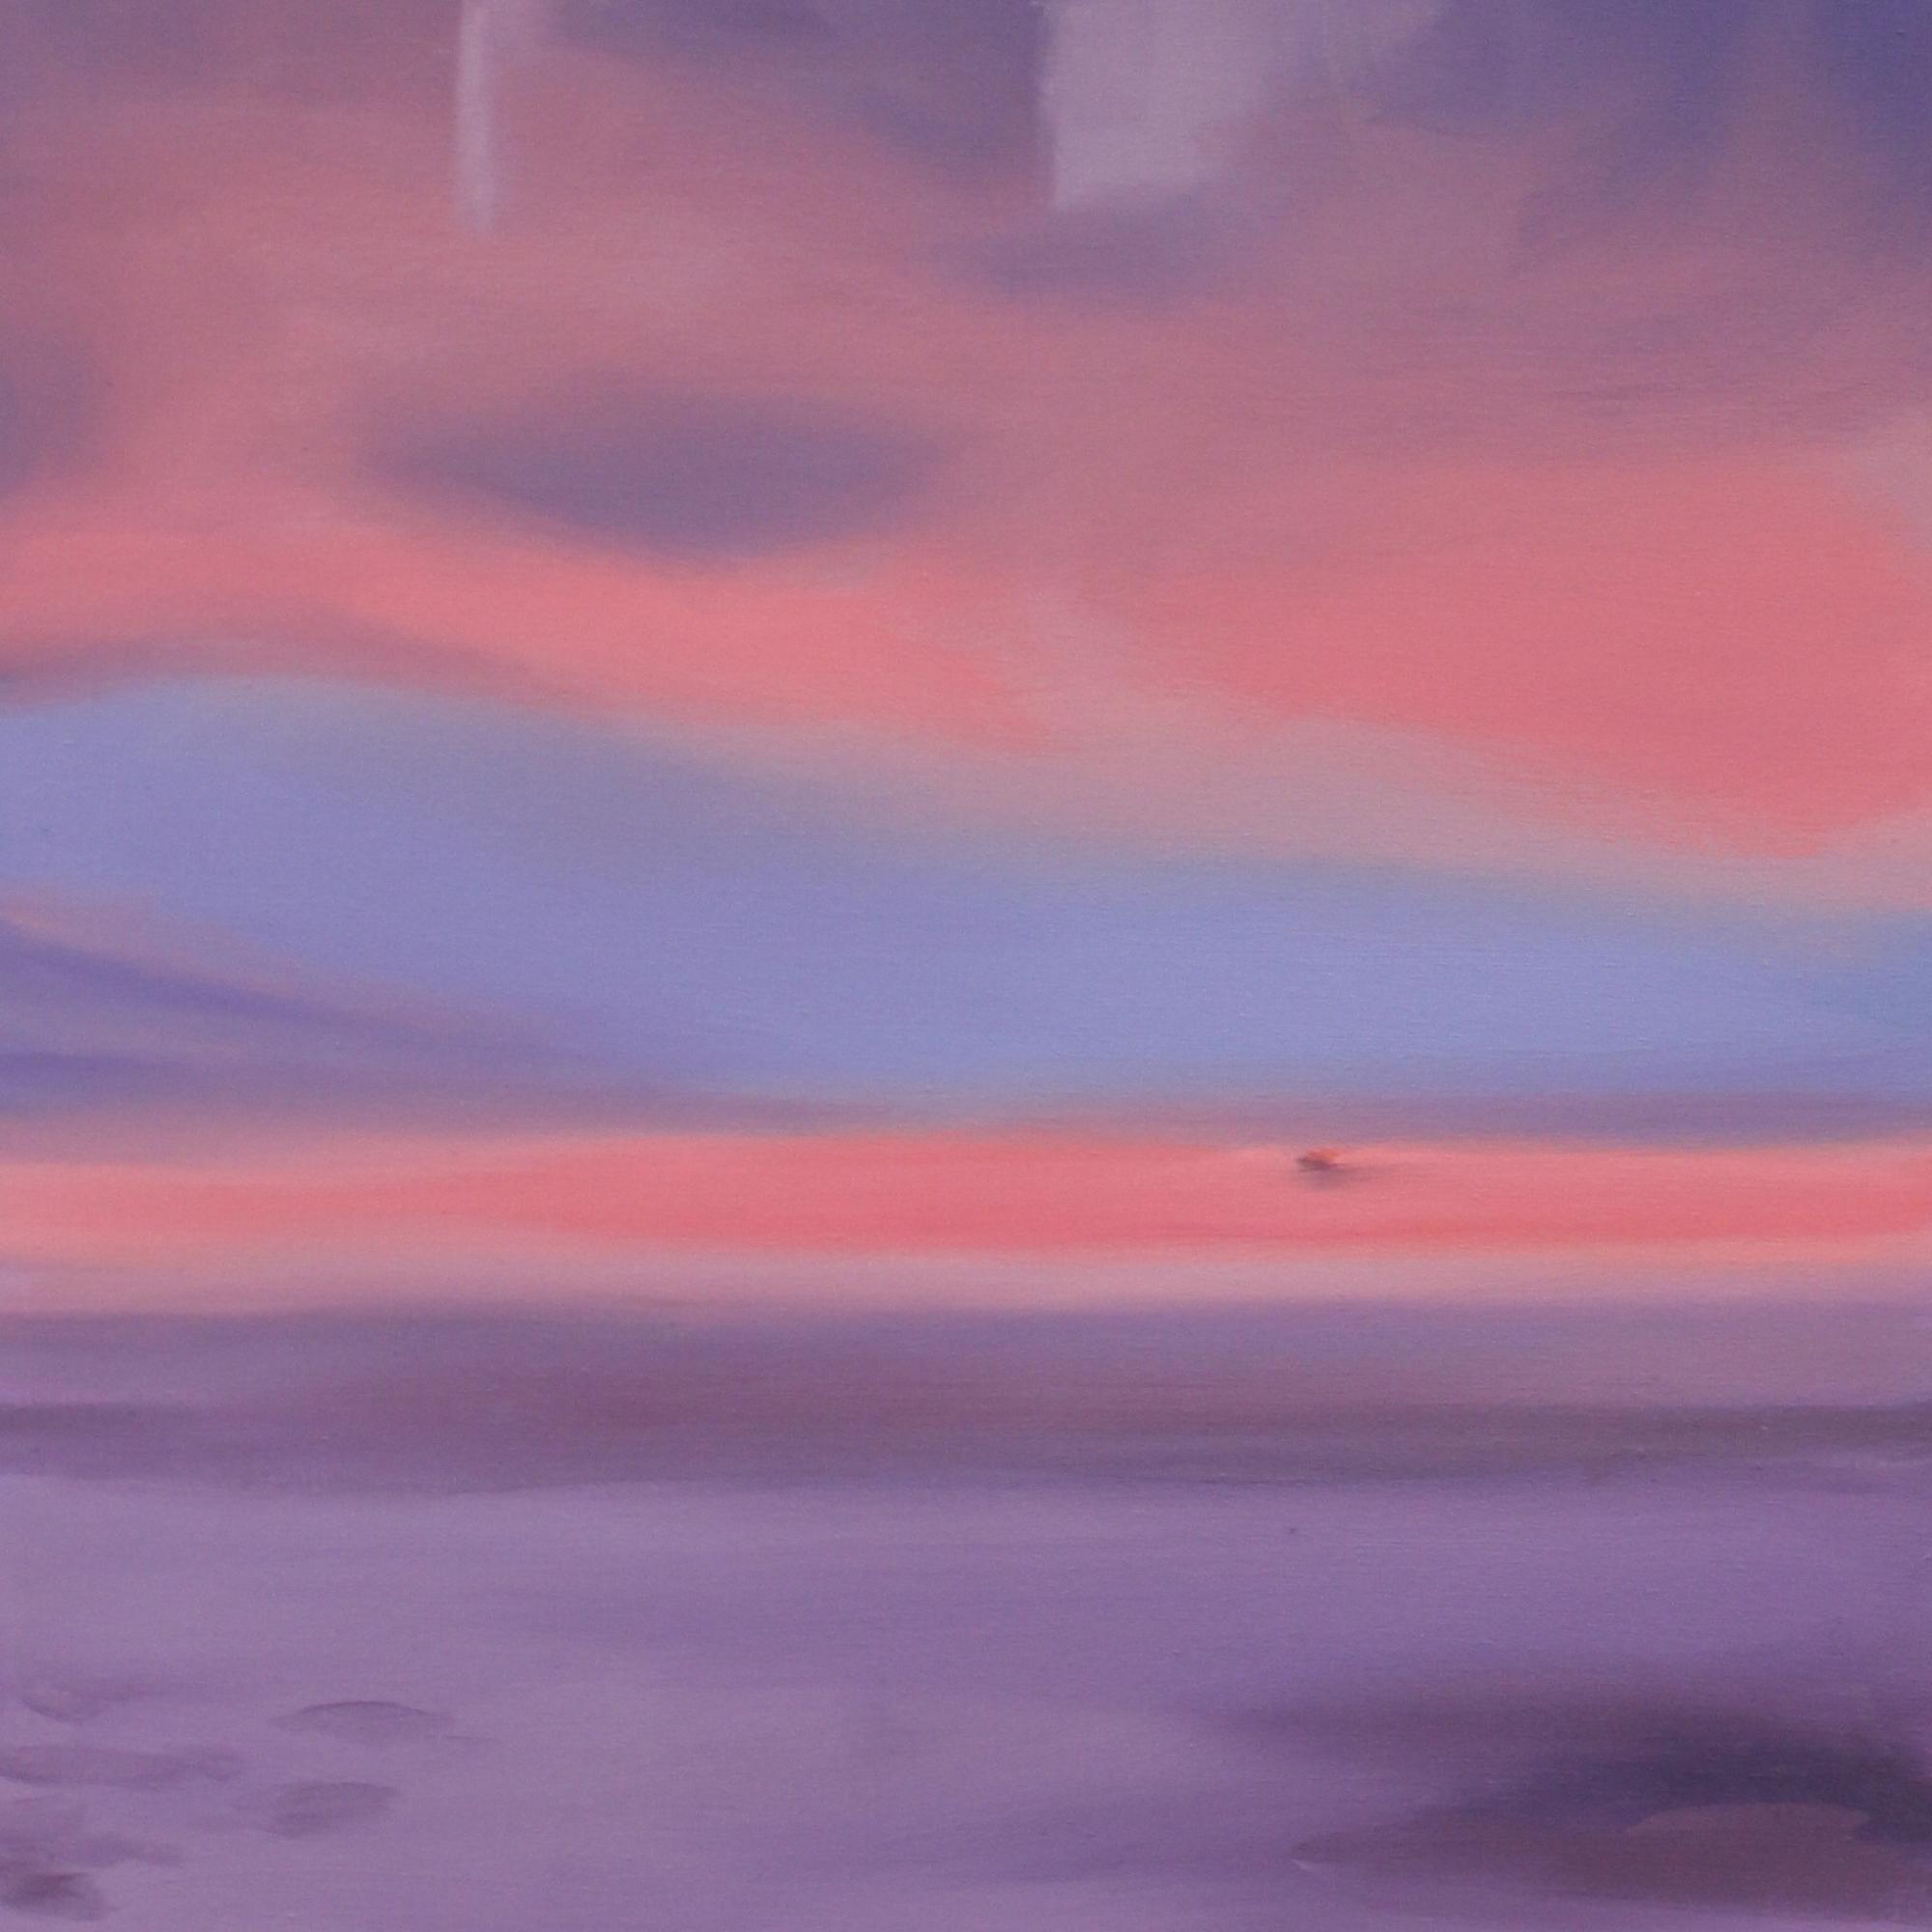 Displayed is a square photo of a rosy sunset as seen from the sky. The clouds are combinations of blues, violets and pinks.